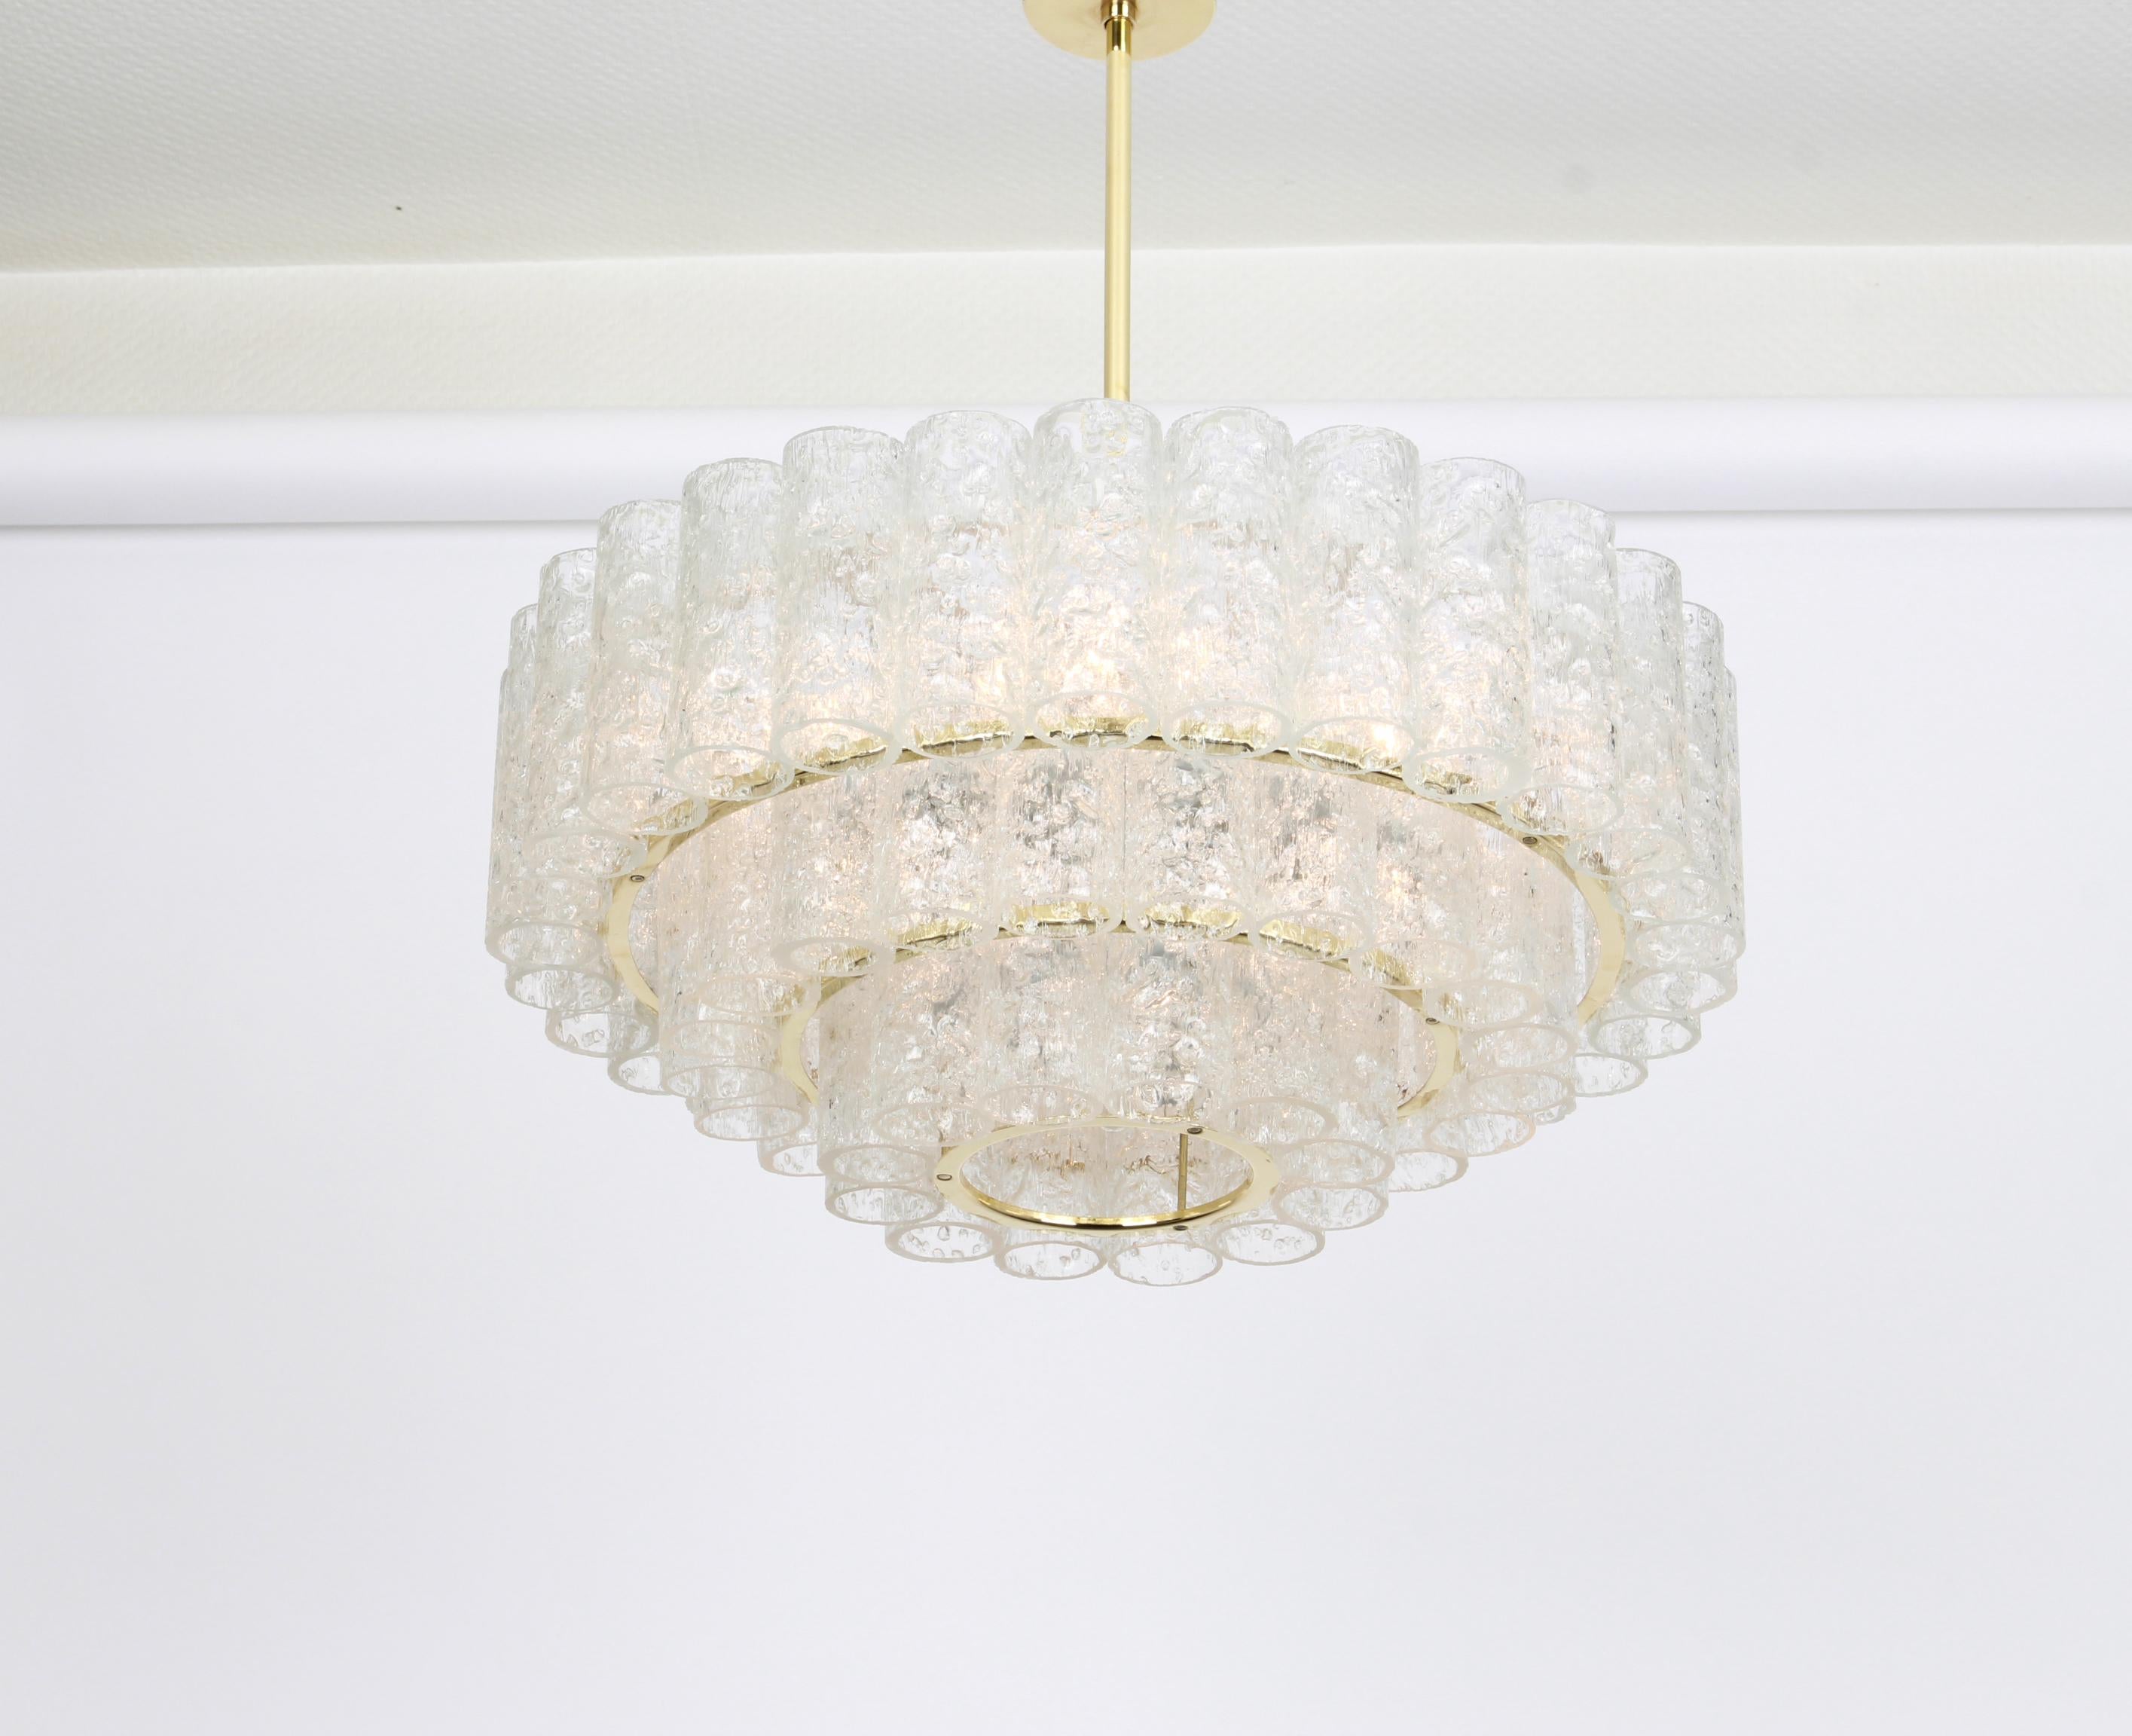 1 of 2 Stunning Murano Ice Glass Tubes Chandelier by Doria, Germany, 1960s For Sale 6